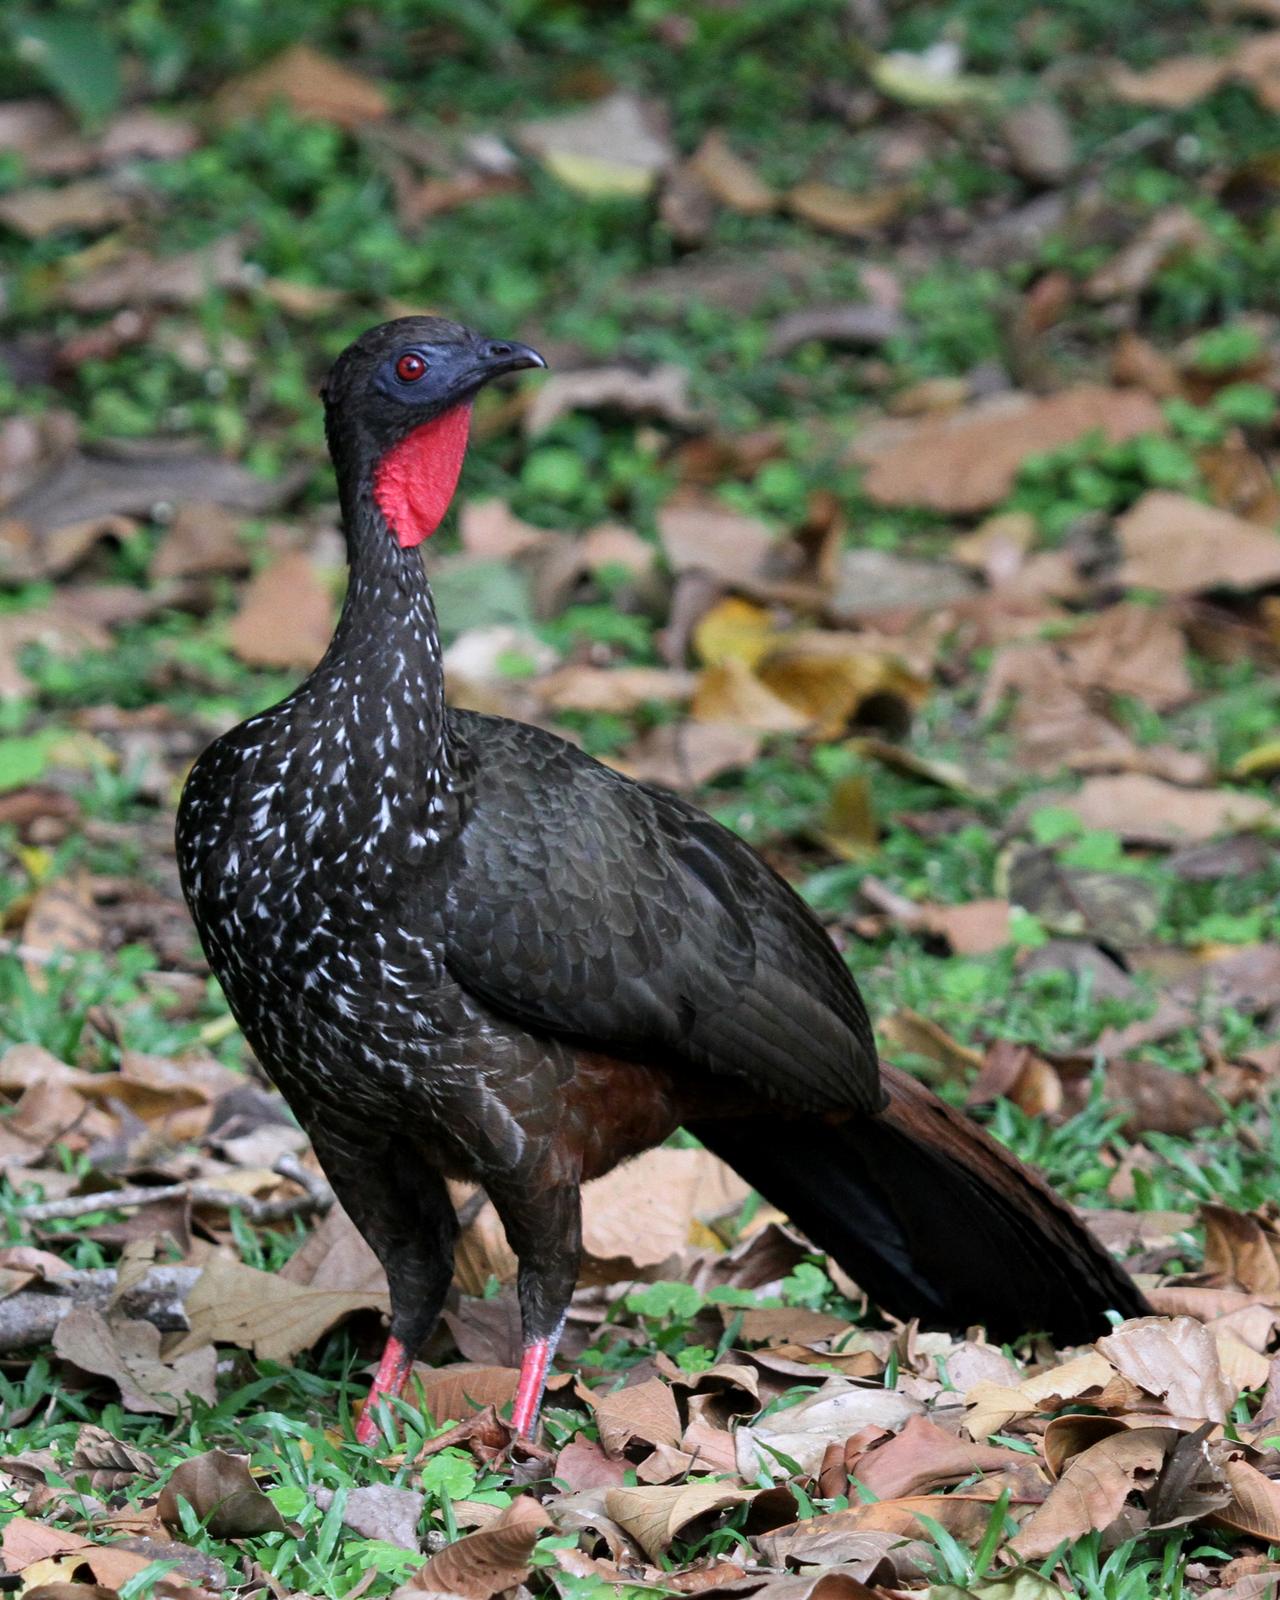 Crested Guan Photo by Matthew Grube